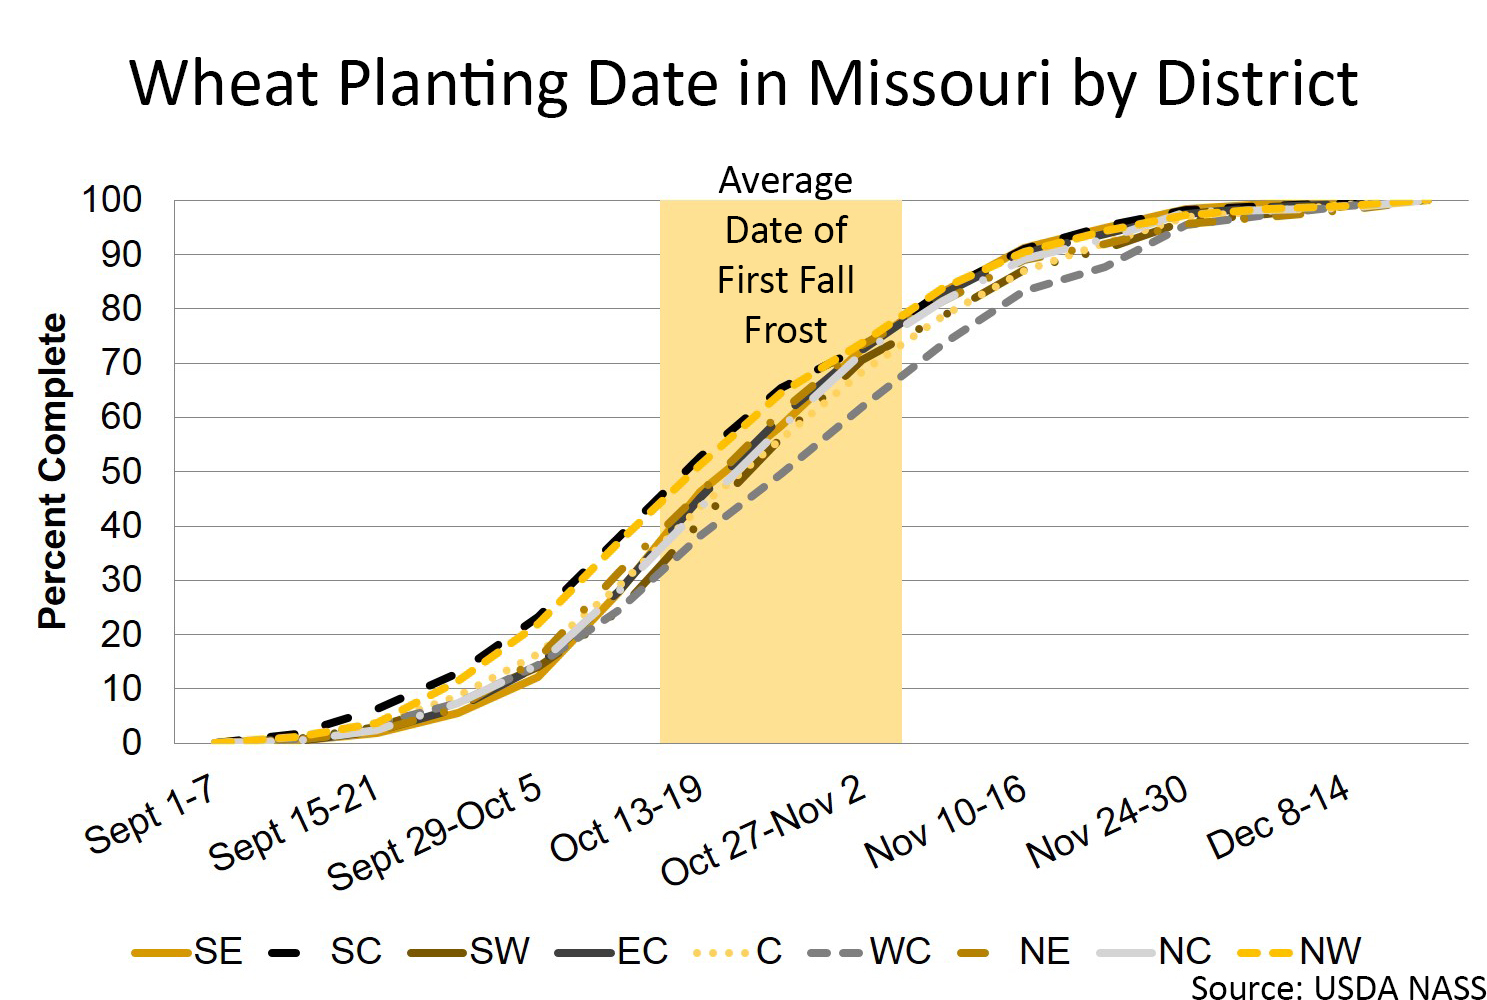 Missouri wheat planting date by district chart